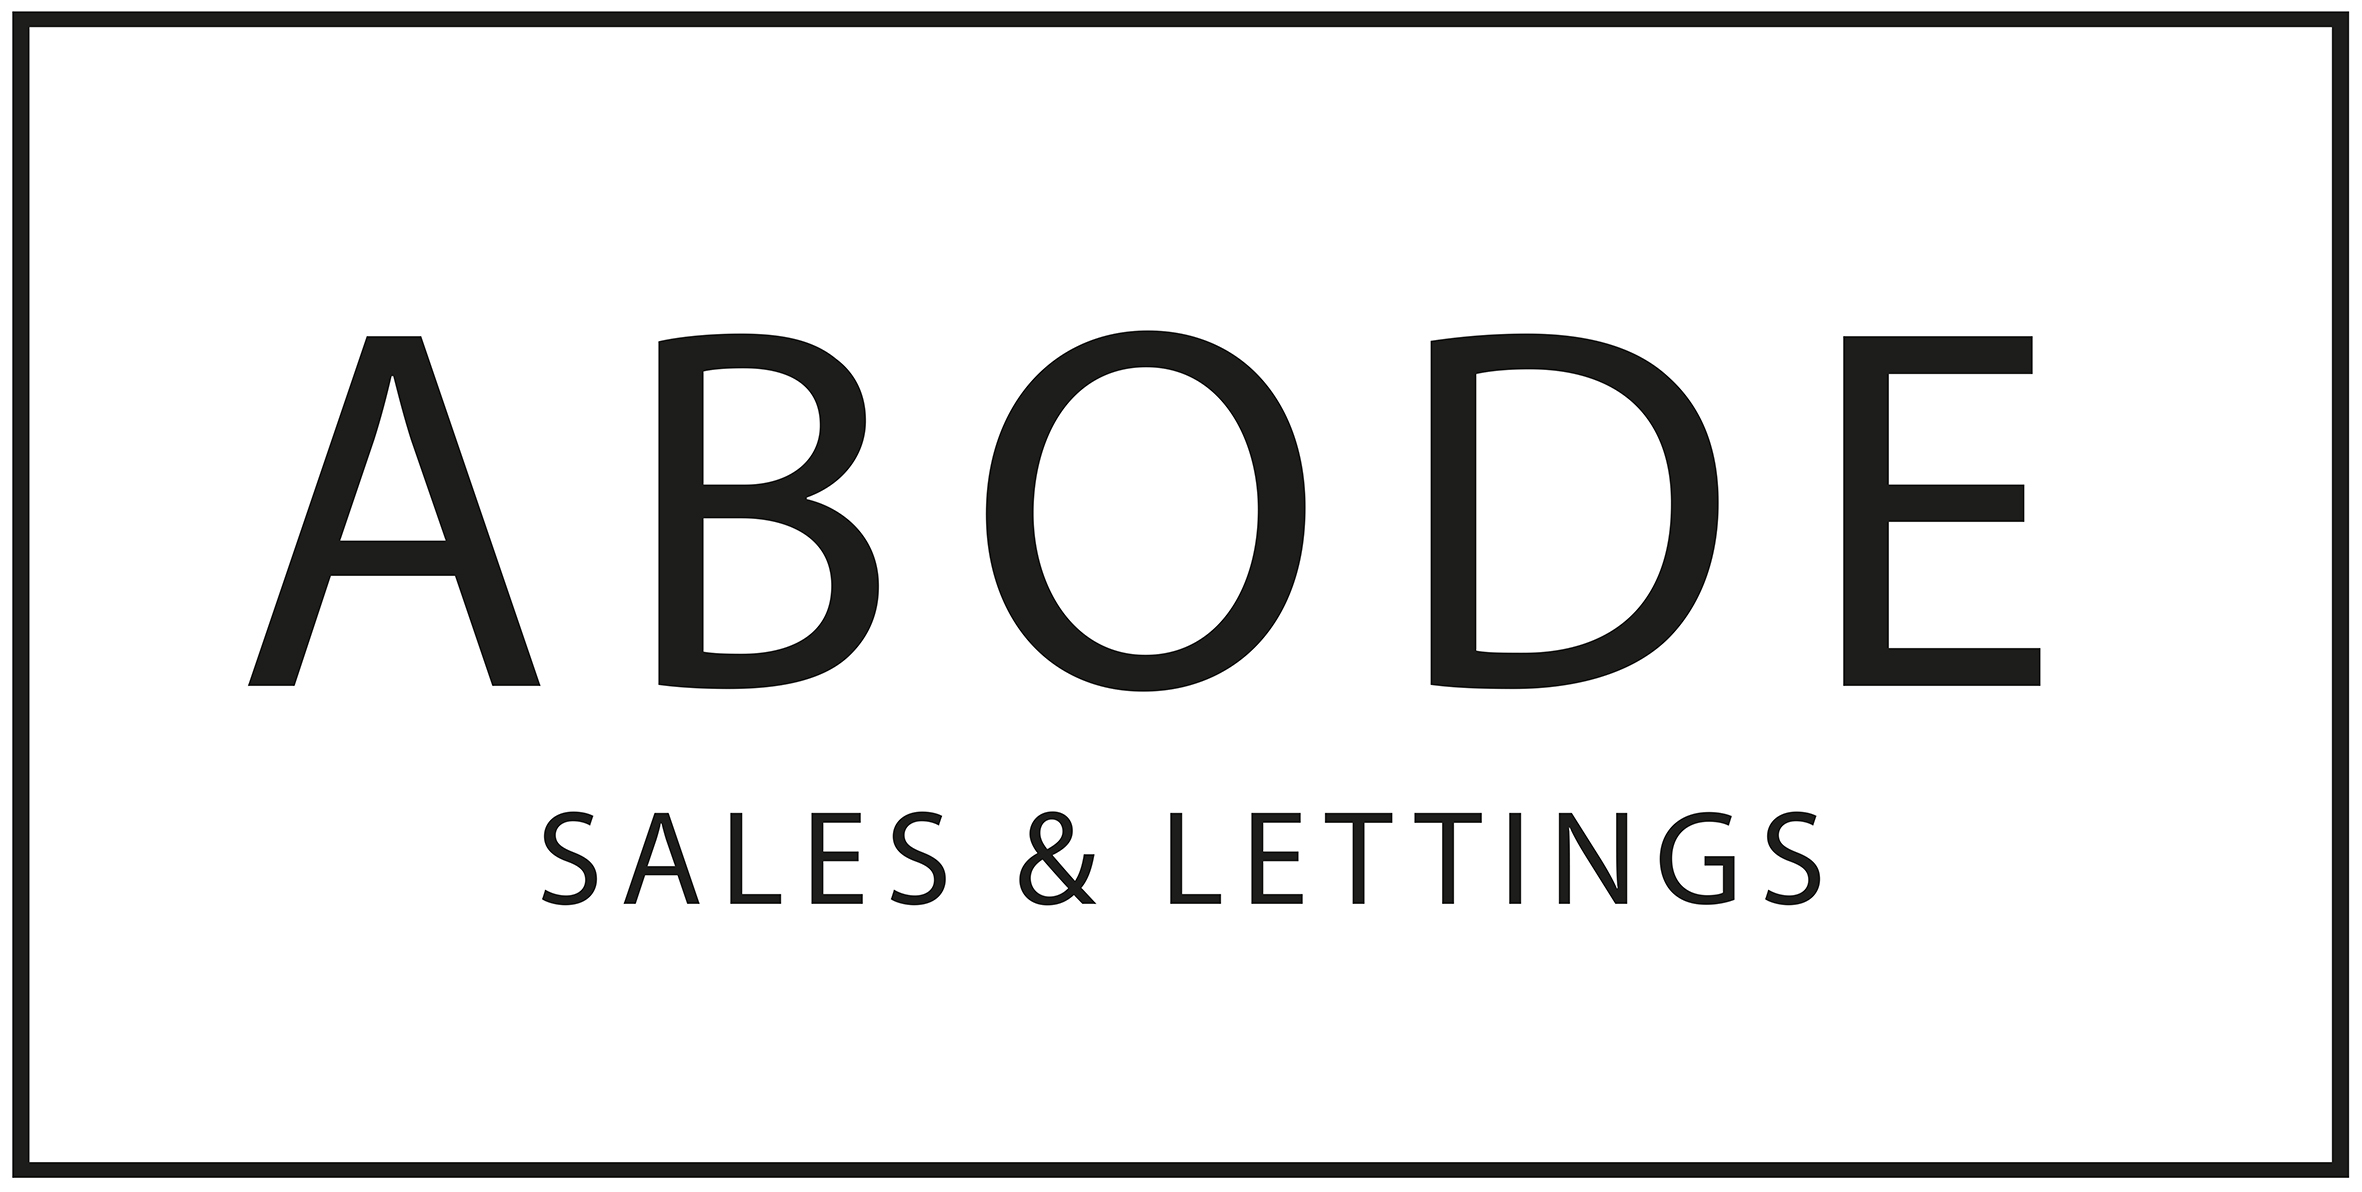 Abode Sales & Lettings